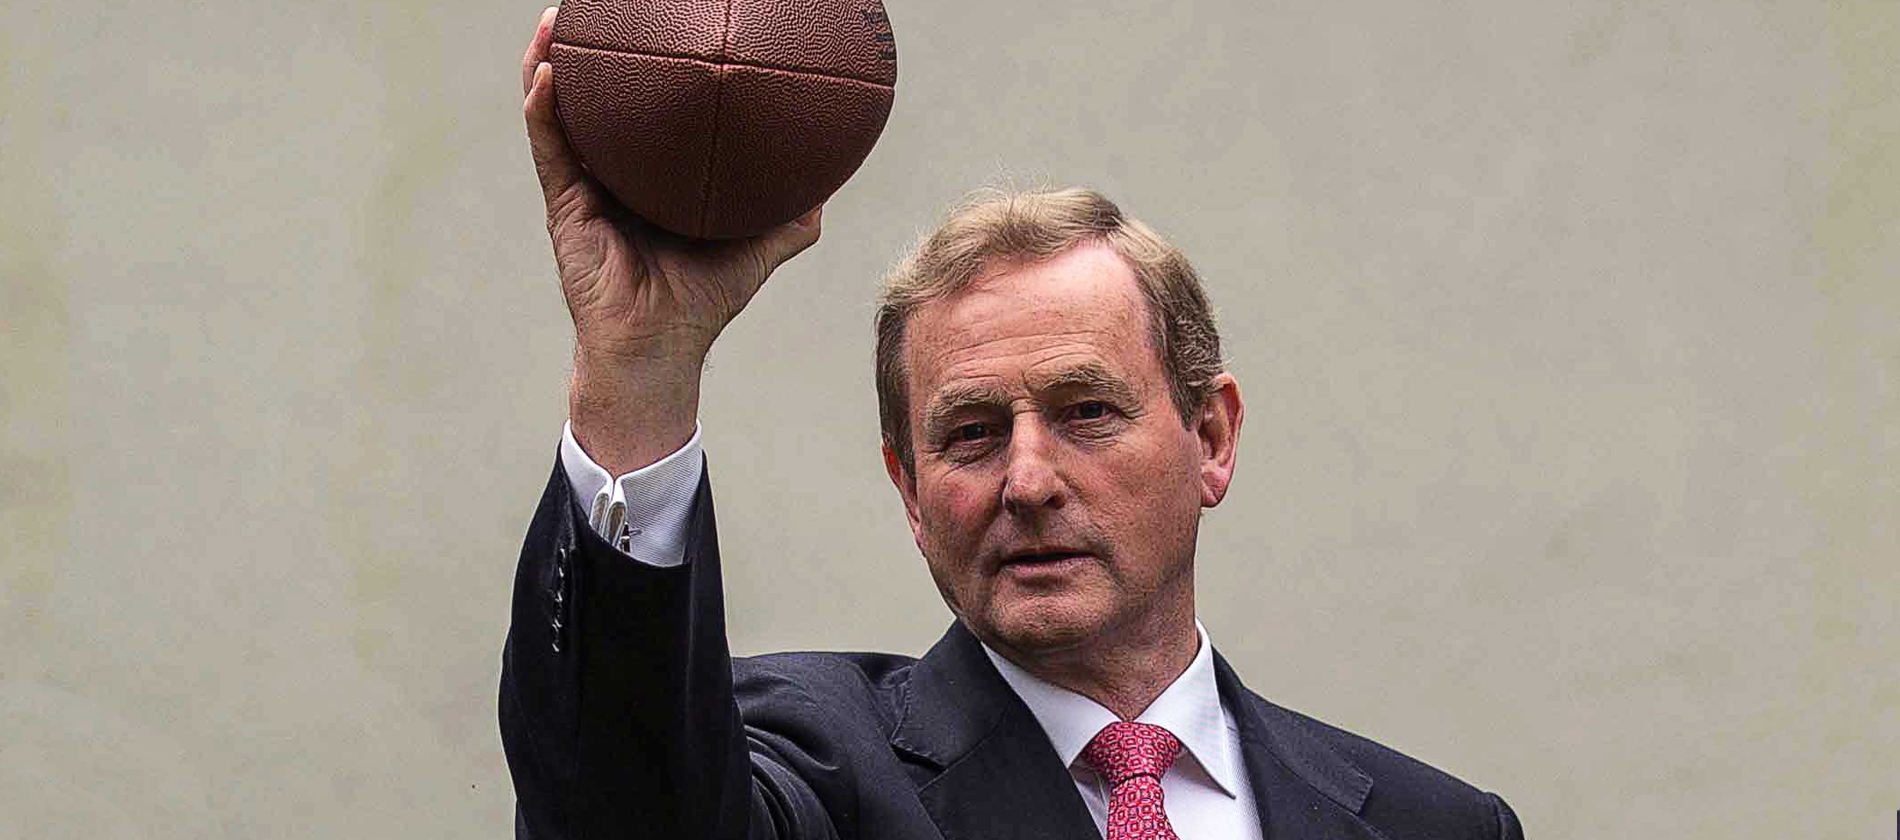 Enda Kenny pretending he knows how to hold an American football